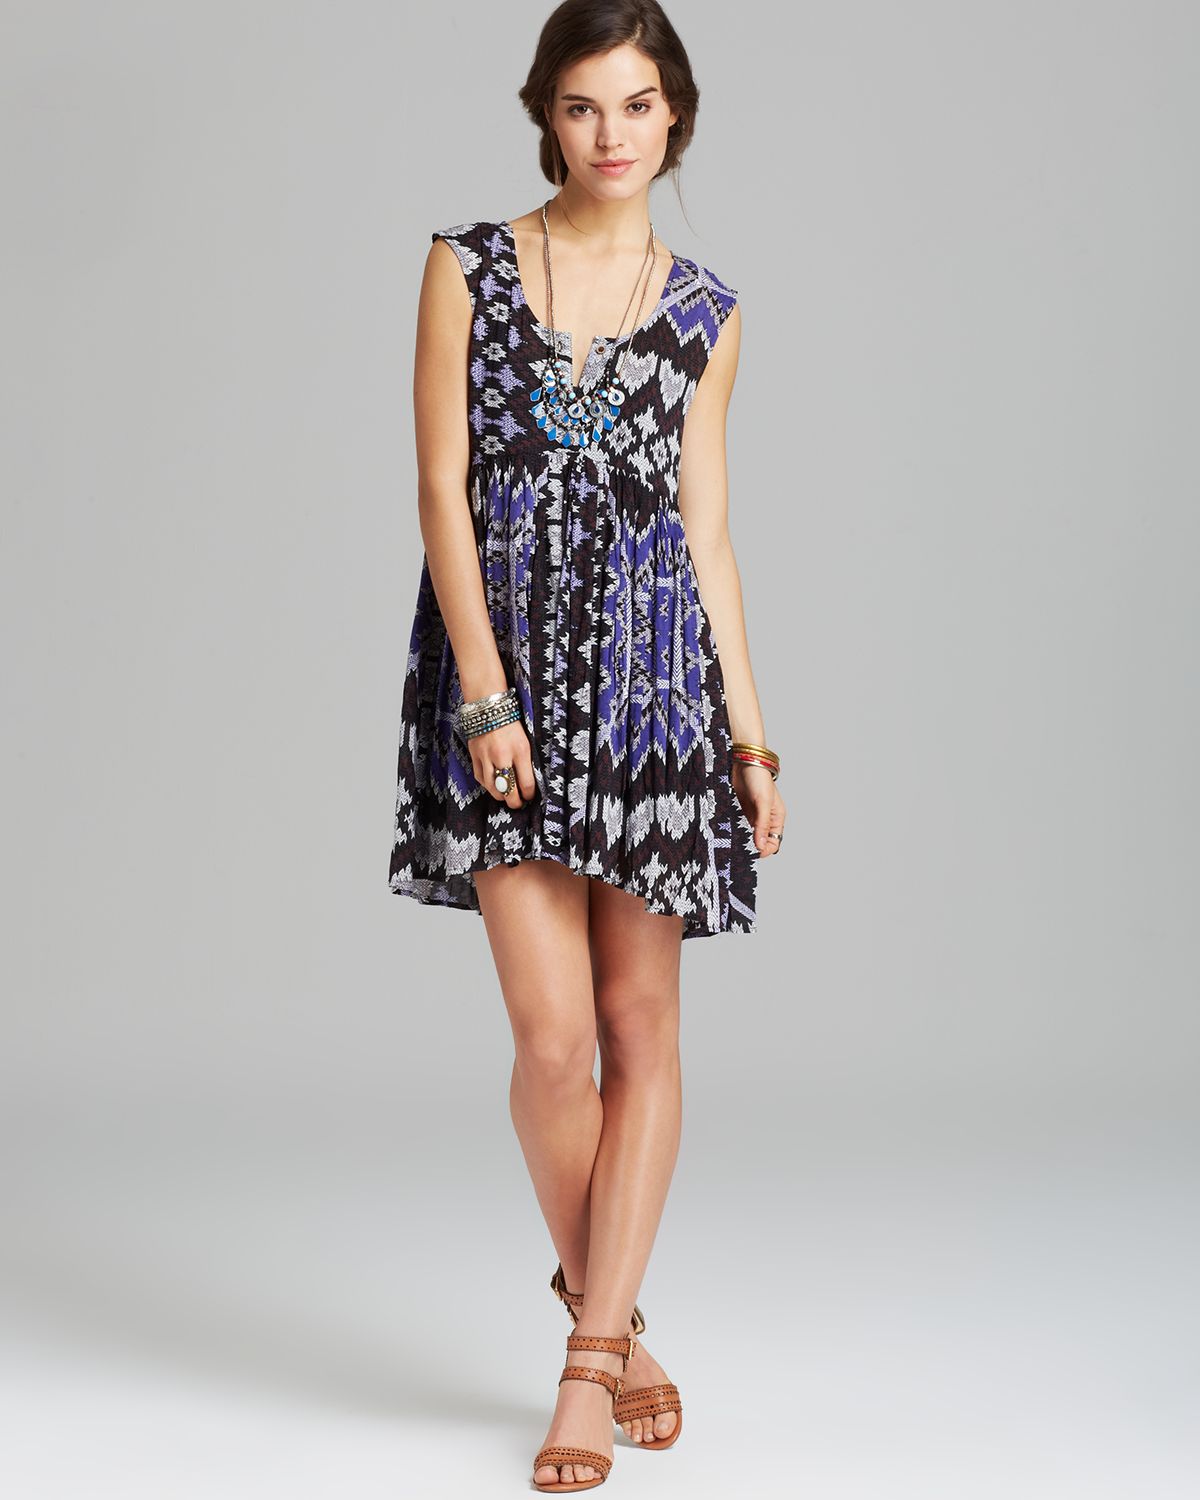 Lyst - Free people Dress Take Me To Thailand in Black